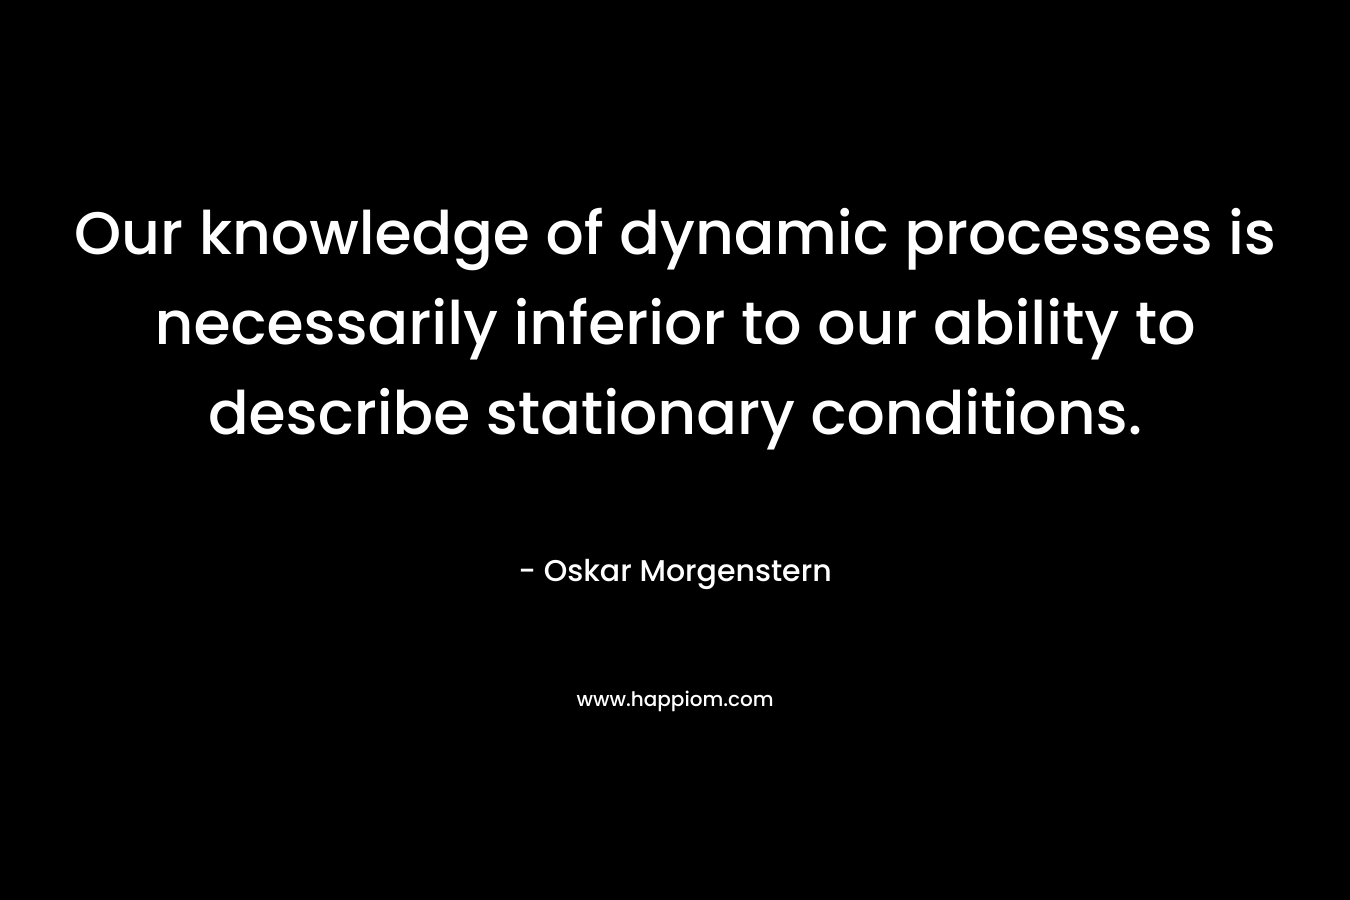 Our knowledge of dynamic processes is necessarily inferior to our ability to describe stationary conditions. – Oskar Morgenstern